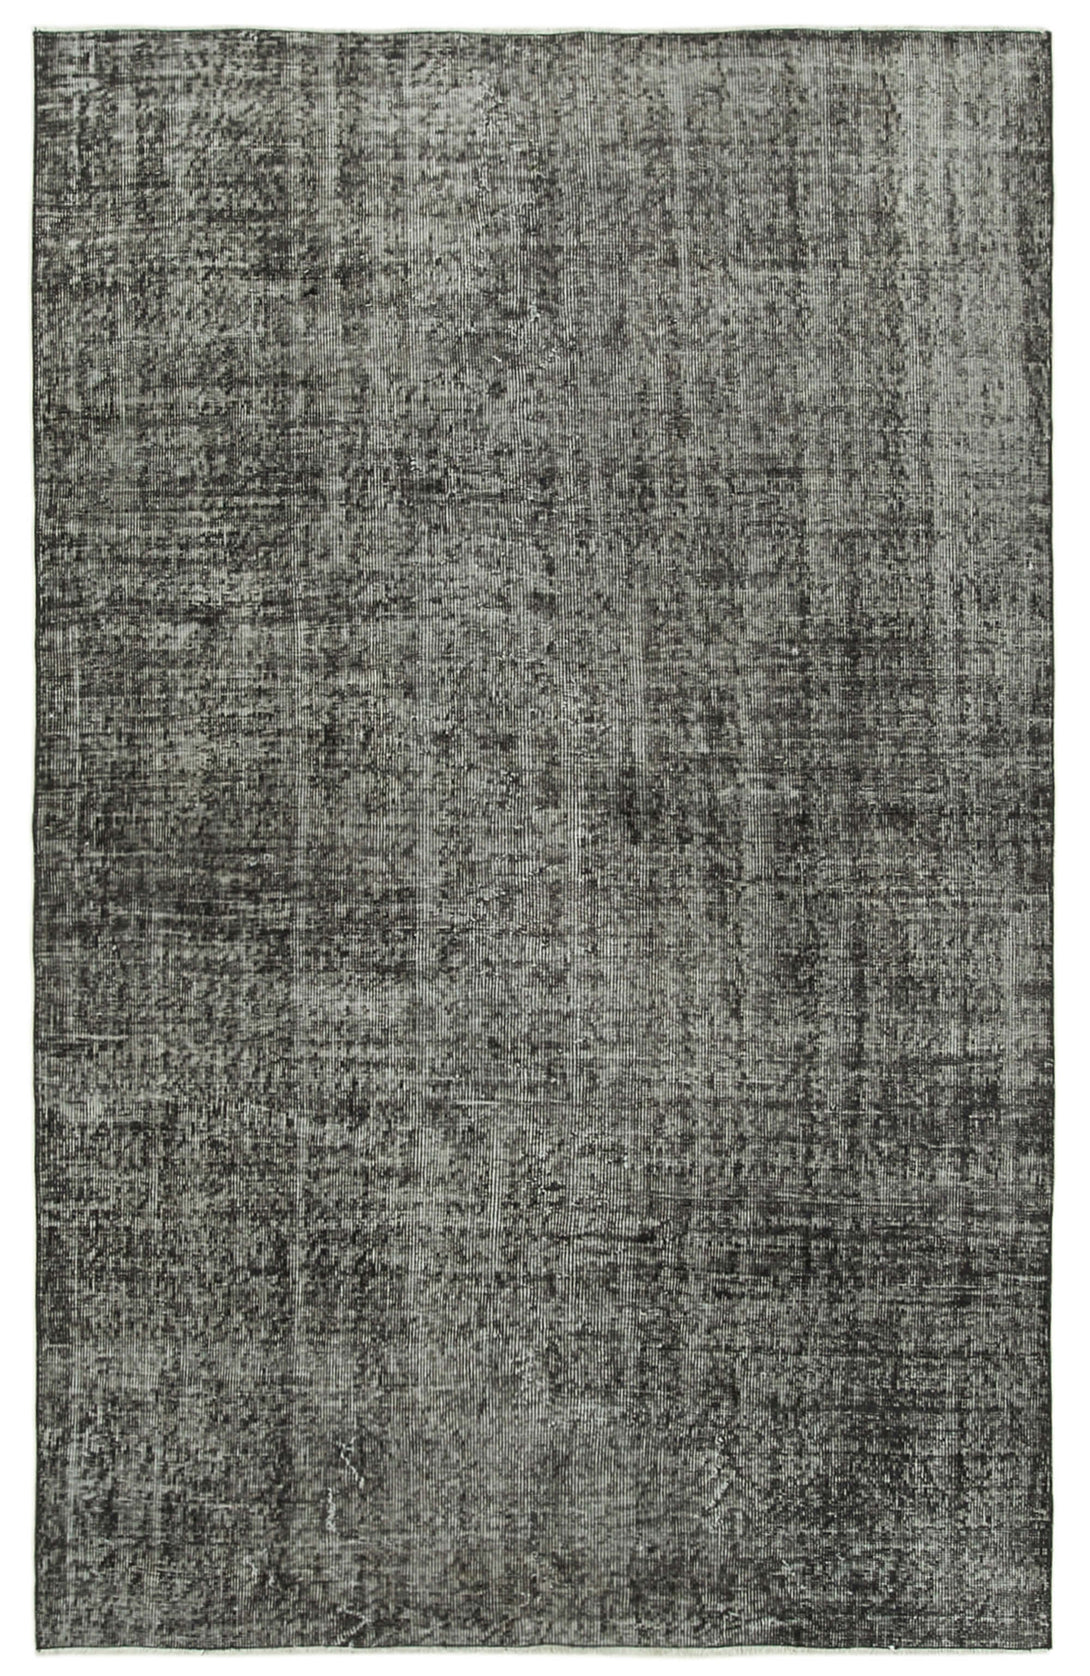 Handmade Overdyed Area Rug > Design# OL-AC-39461 > Size: 5'-3" x 8'-1", Carpet Culture Rugs, Handmade Rugs, NYC Rugs, New Rugs, Shop Rugs, Rug Store, Outlet Rugs, SoHo Rugs, Rugs in USA